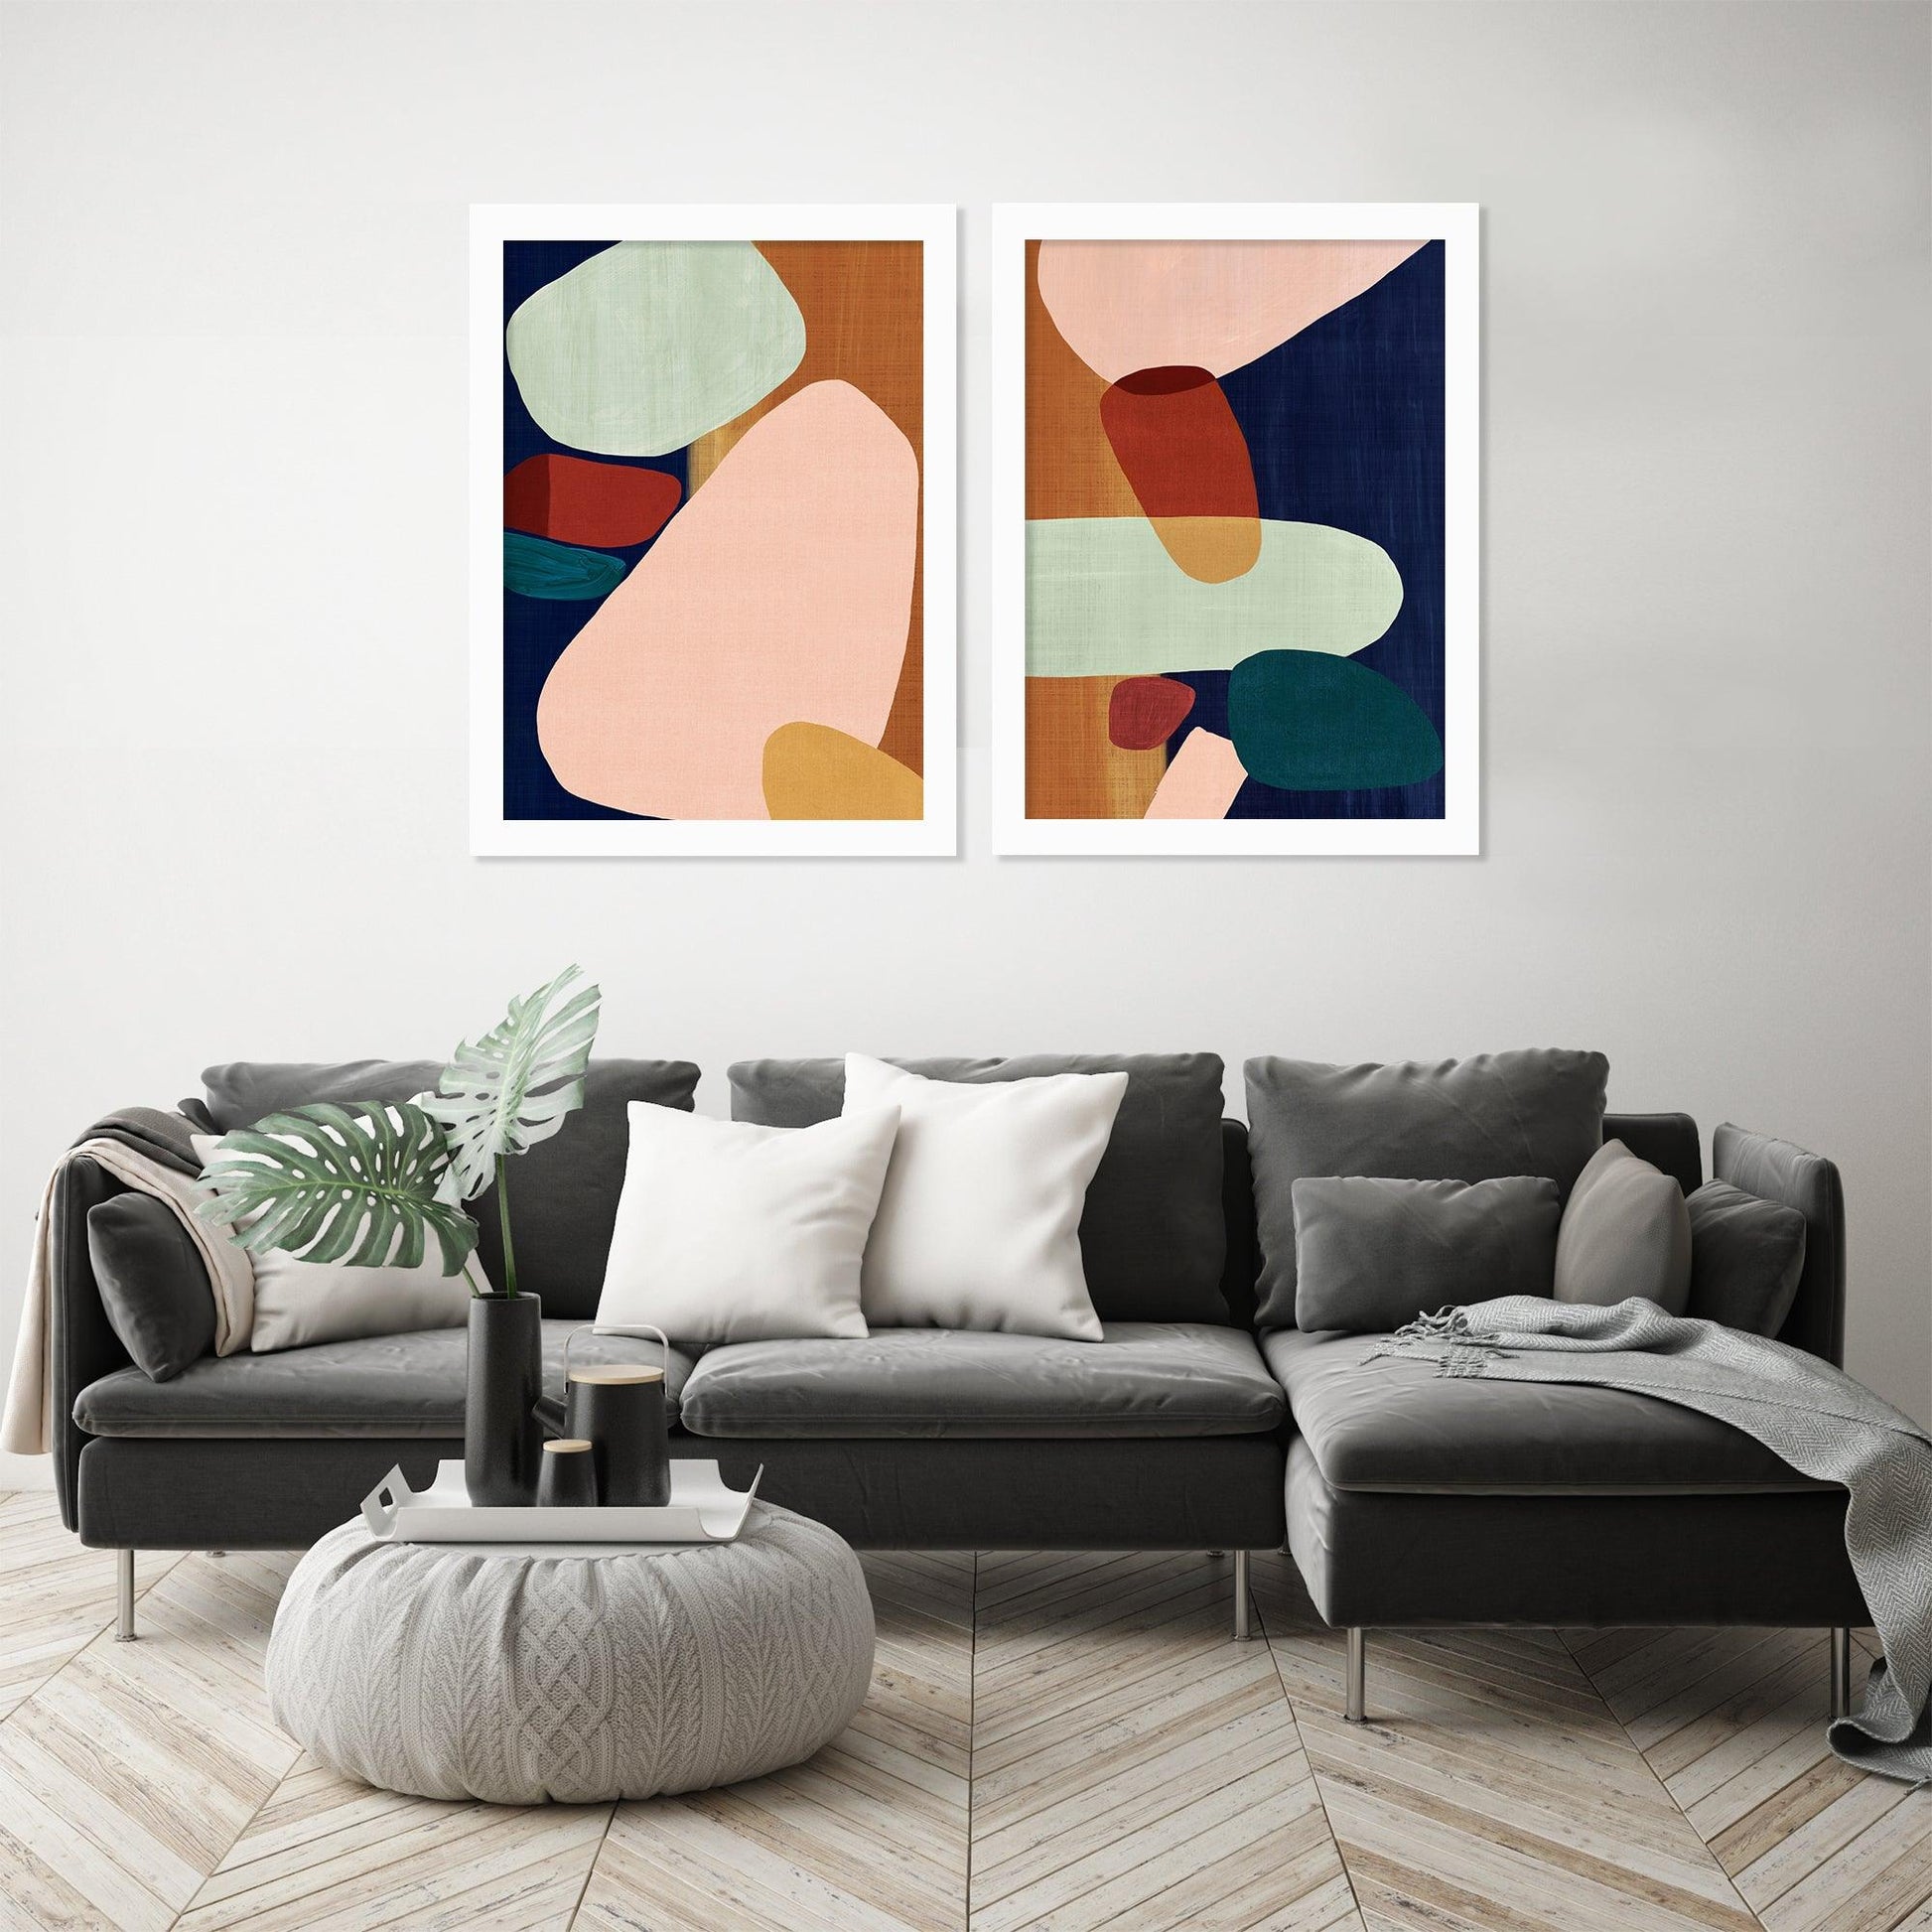 Stacking Pebbles by PI Creative Art - 2 Piece Framed Print Set - Americanflat